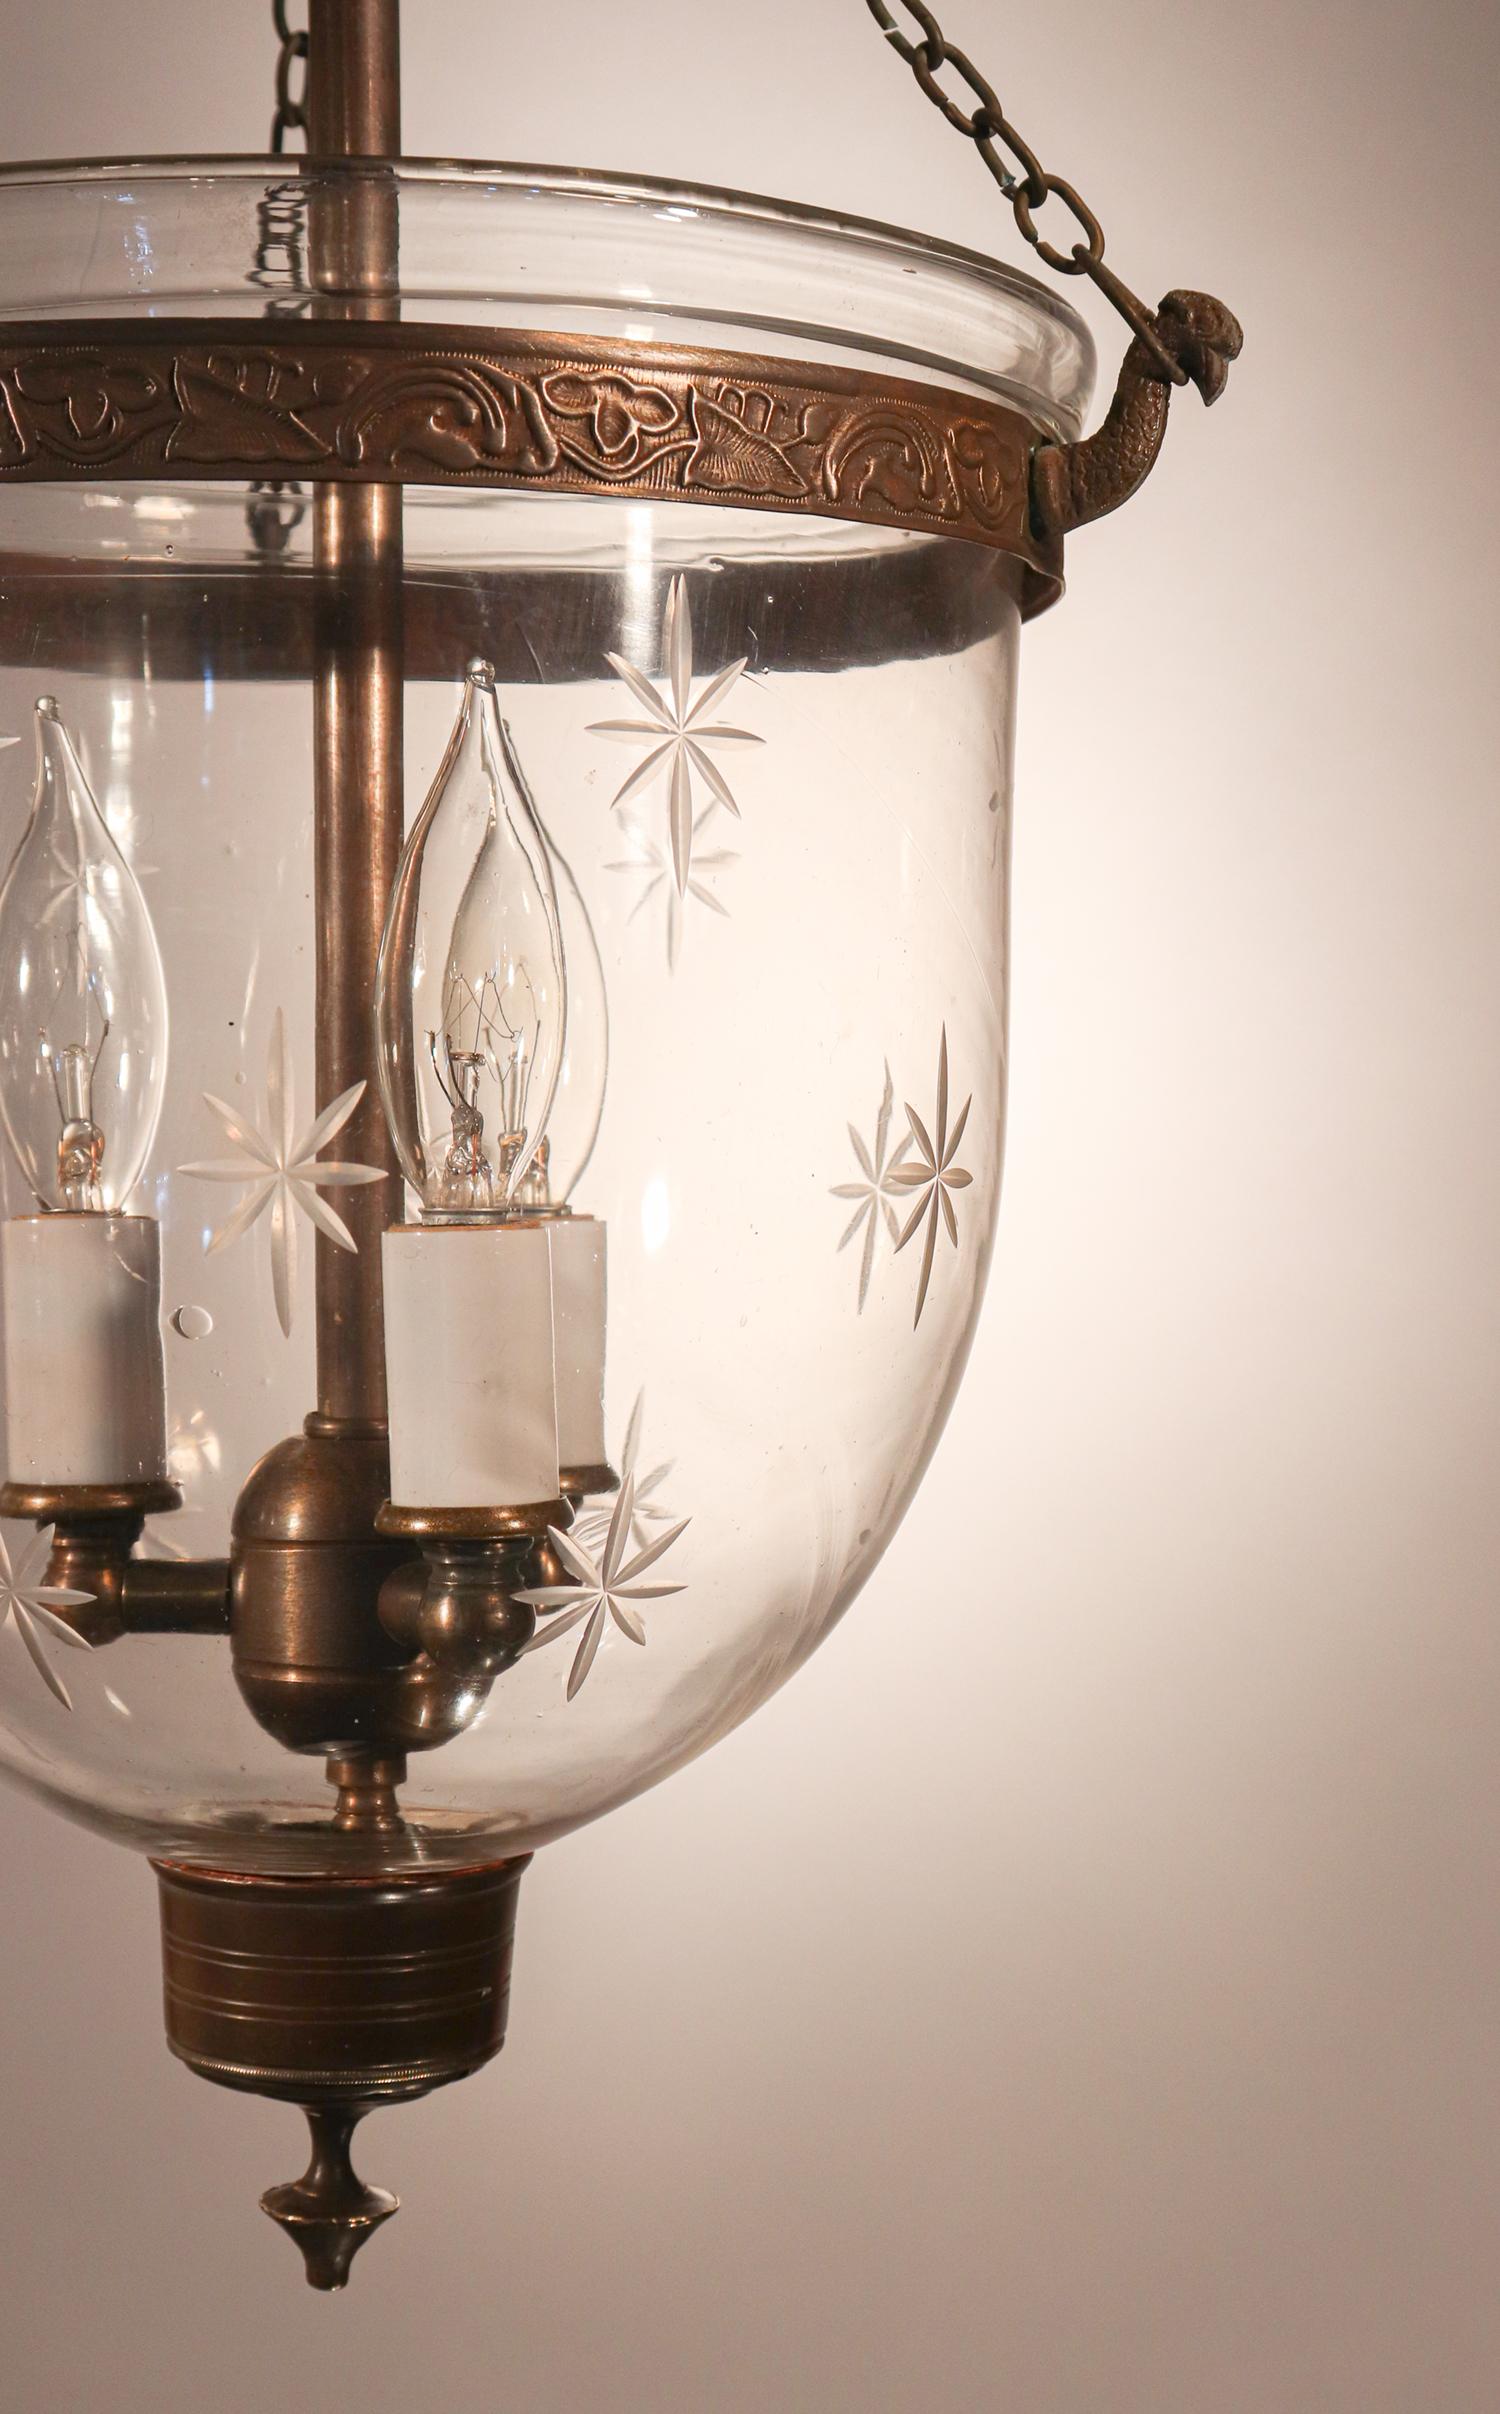 Etched Petite Bell Jar Lantern with Star Etching